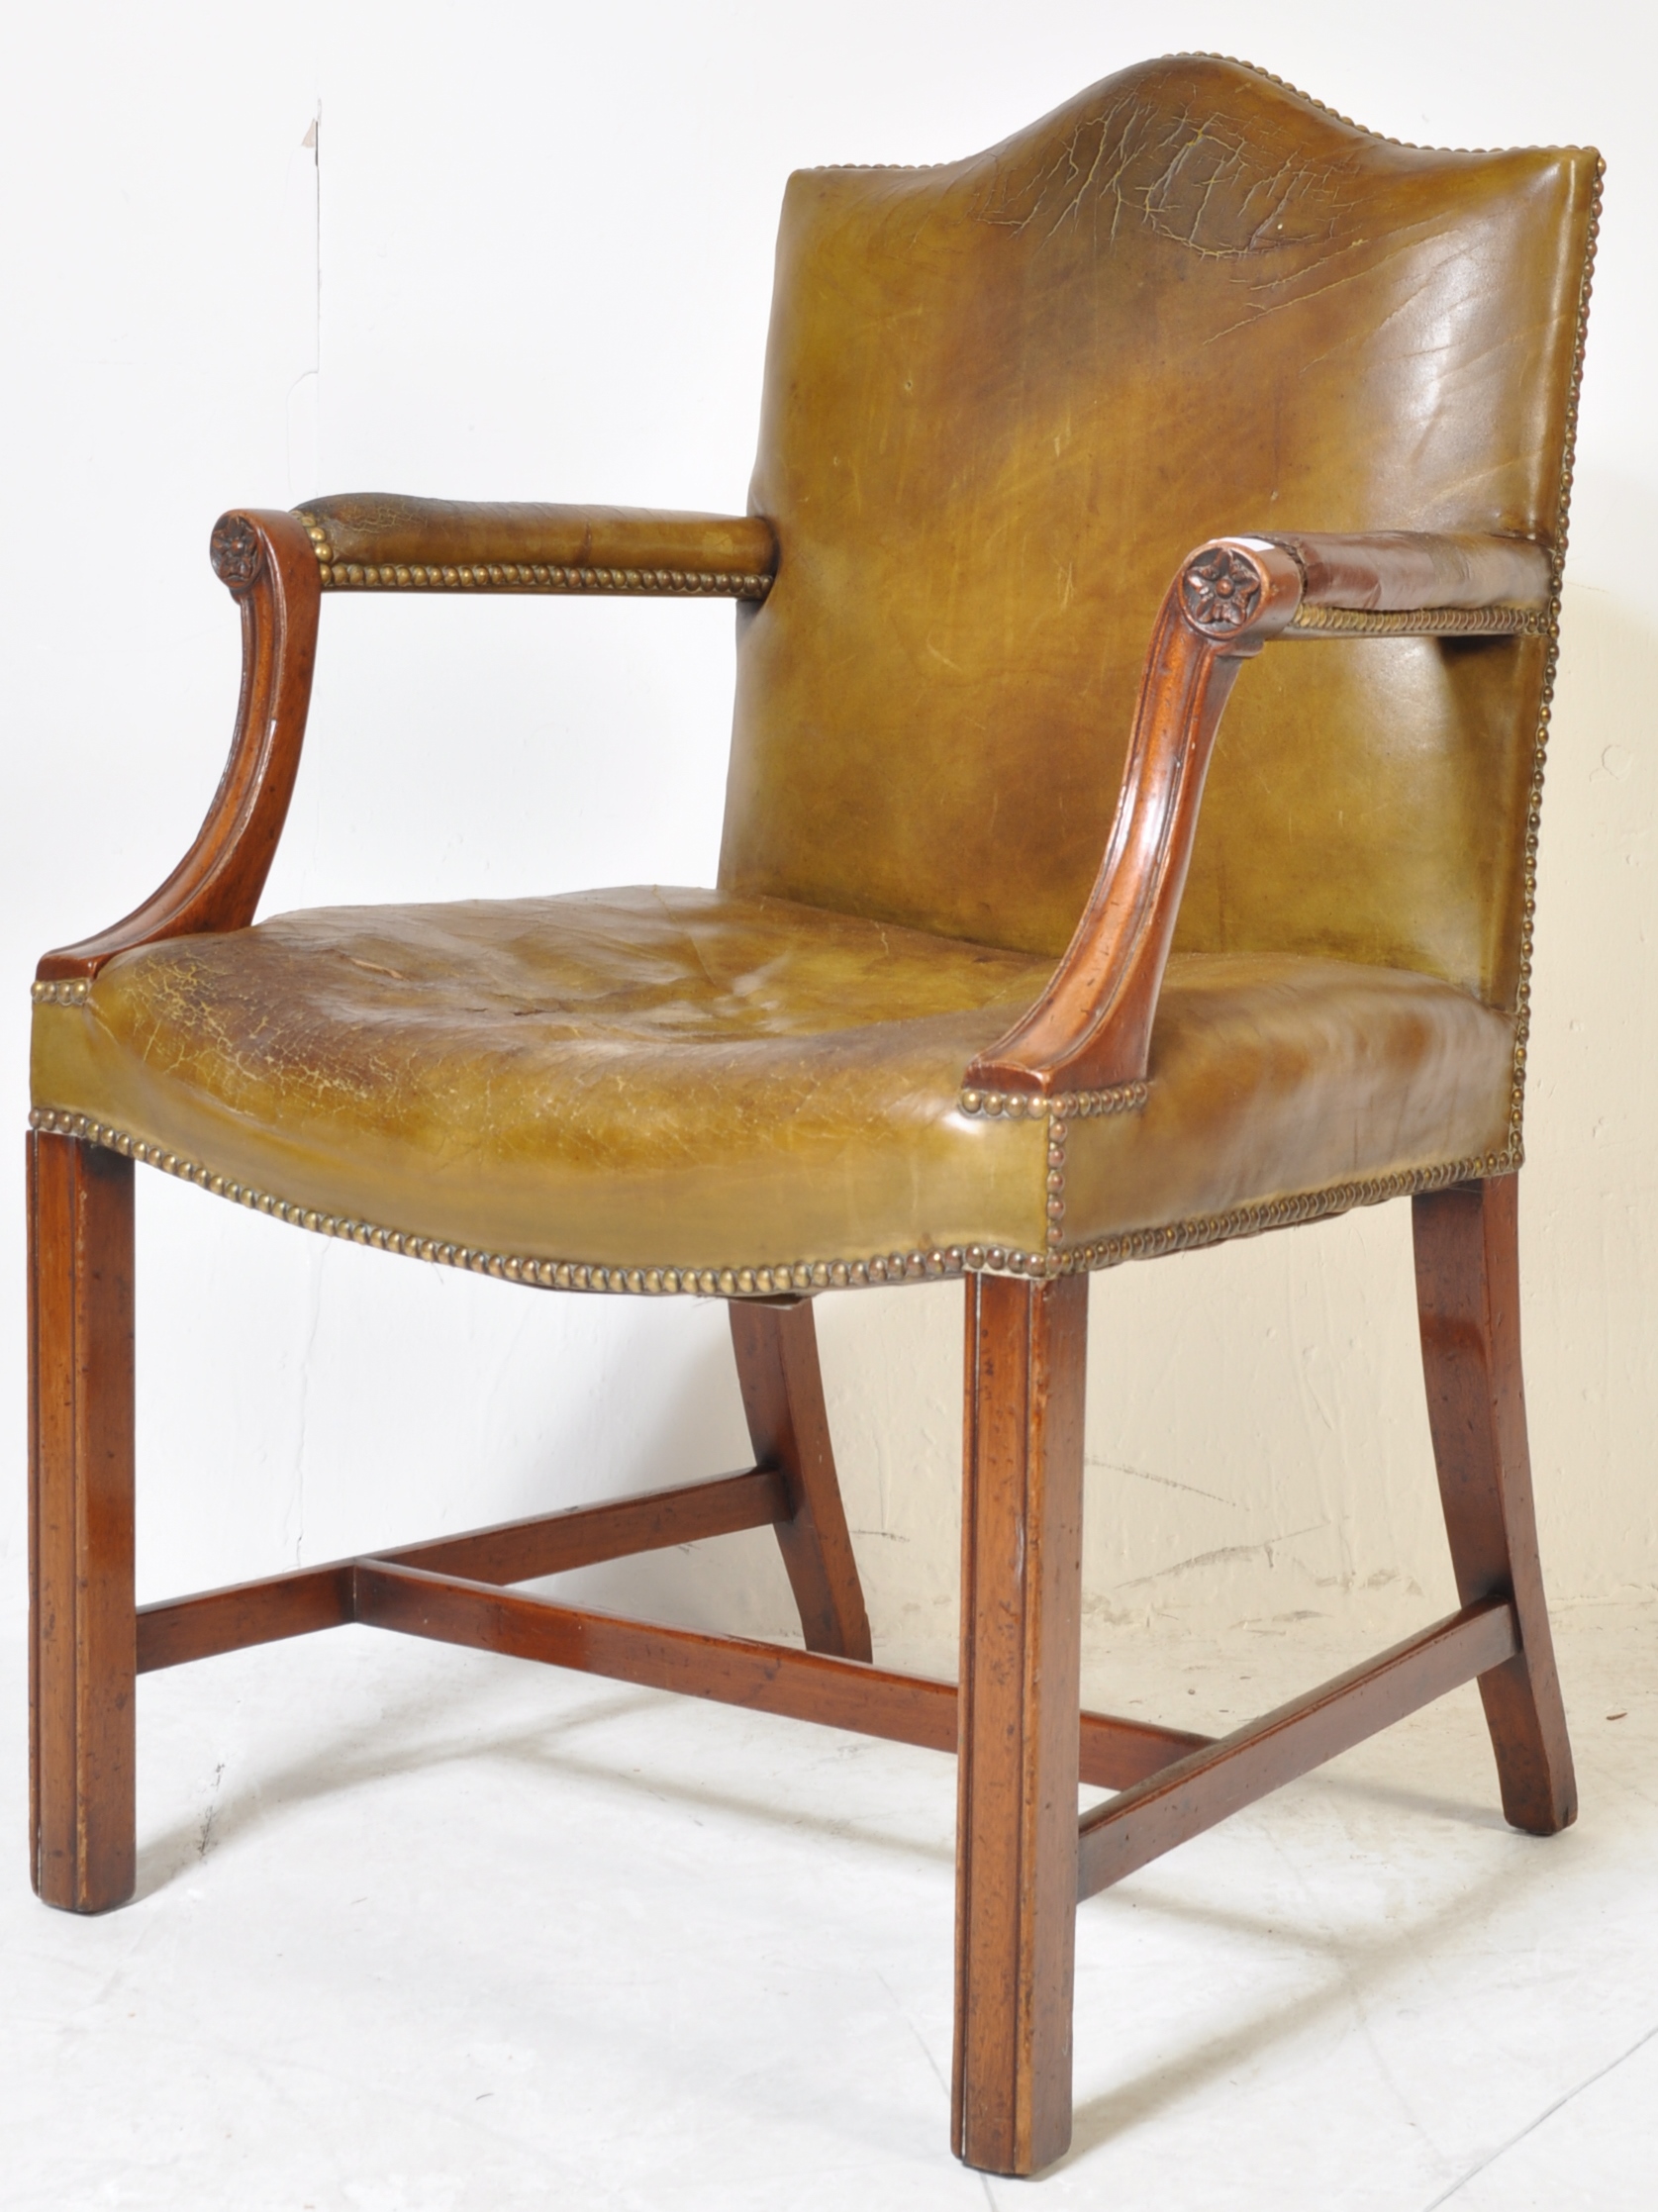 MAHOGANY AND LEATHER GAINSBOROUGH DESK ARMCHAIR